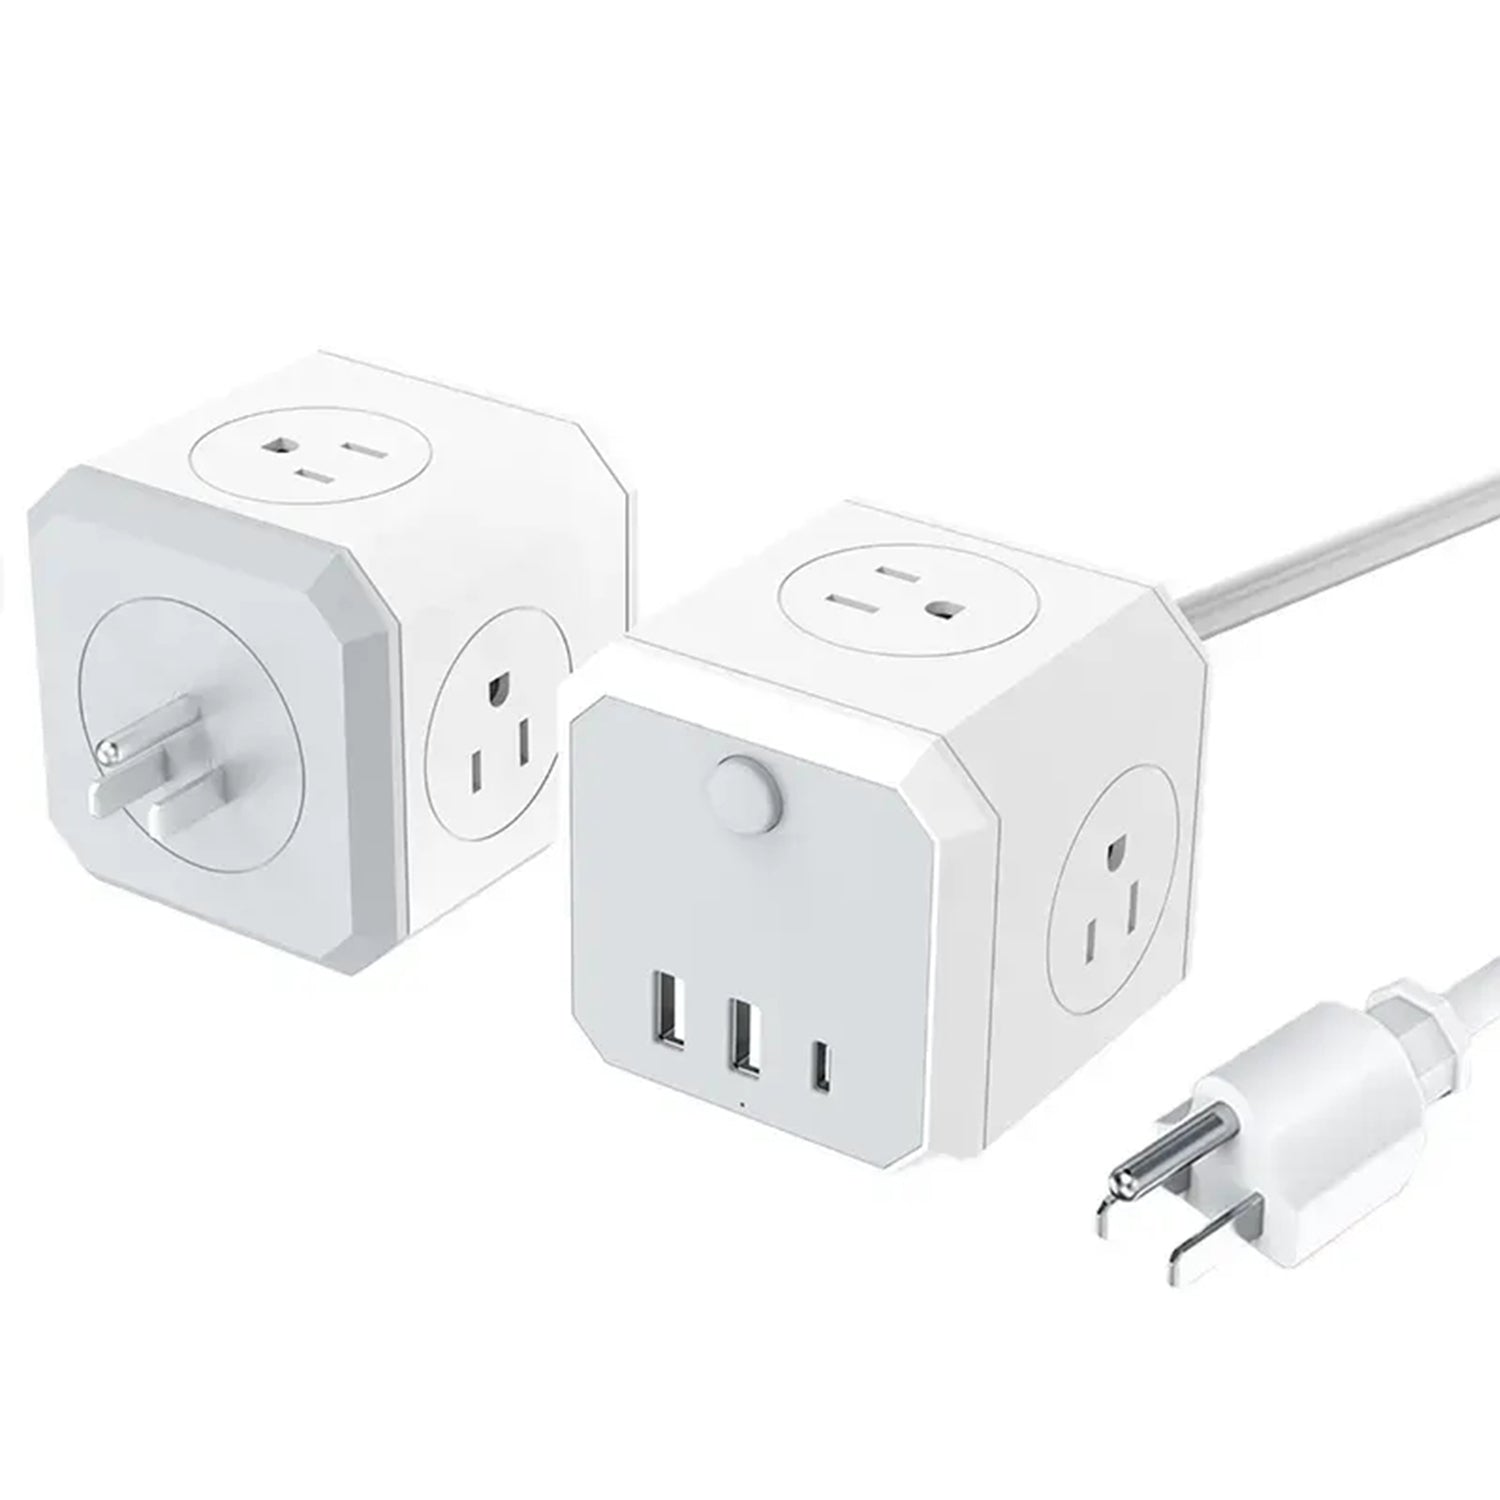 3 USB Ports 4-Sided Socket Wired Power Fast Charge Adapter-White